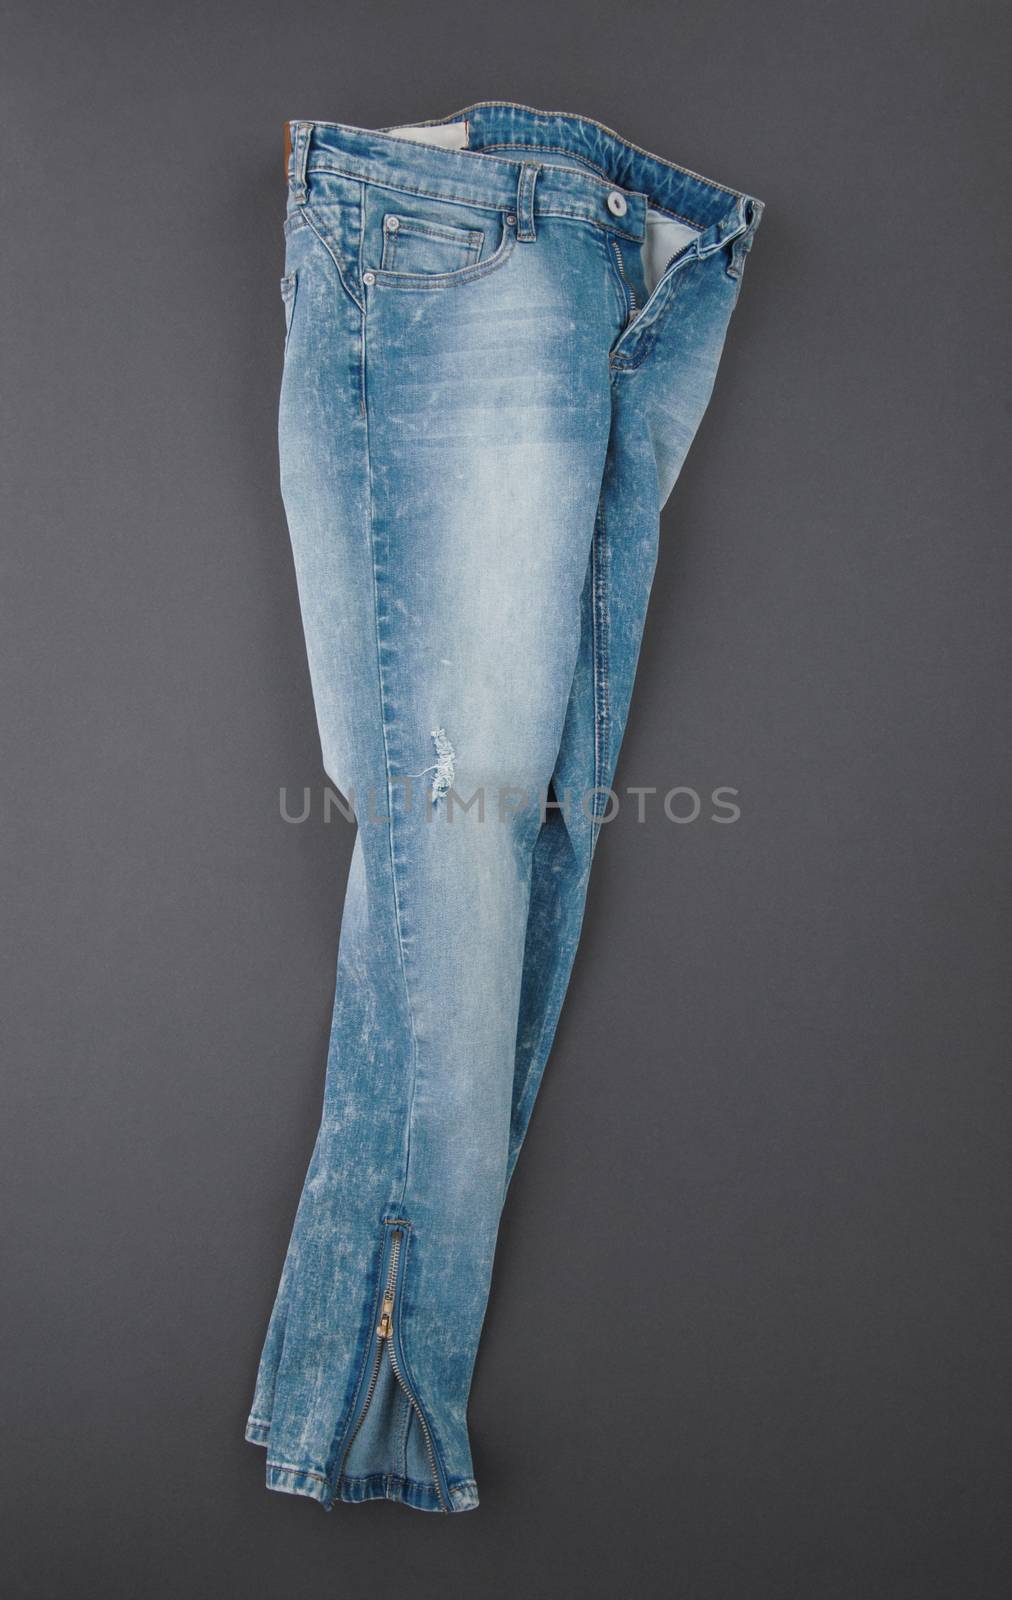 fashionable denim pants on grey background, top view